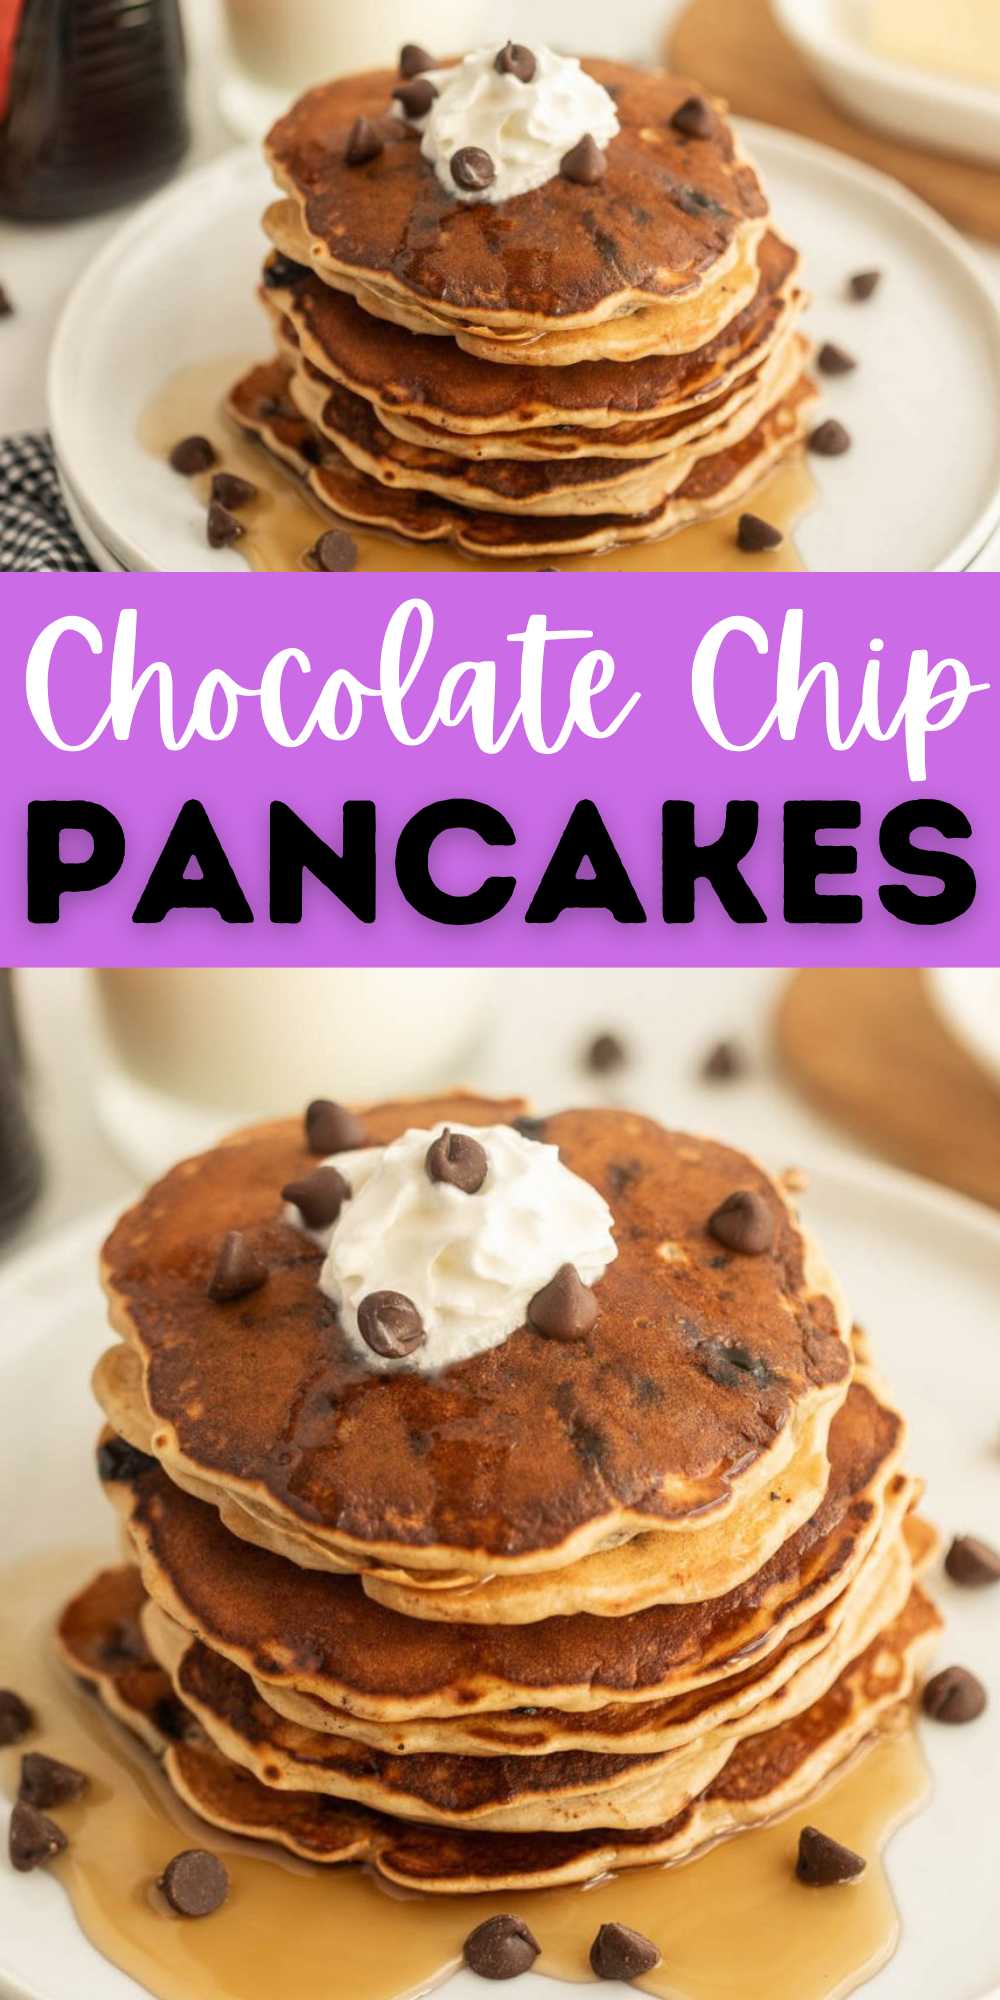 Chocolate Chip Pancakes is the perfect homemade fluffy pancake recipe. This pancake recipe is full of chocolate chips and flavor. We love light and fluffy homemade pancakes. These made from scratch pancakes are made easily with simple ingredients. Take you classic pancake recipe to the next level by adding in chocolate chips. #eatingonadime #chocolatechippancakes #pancakes